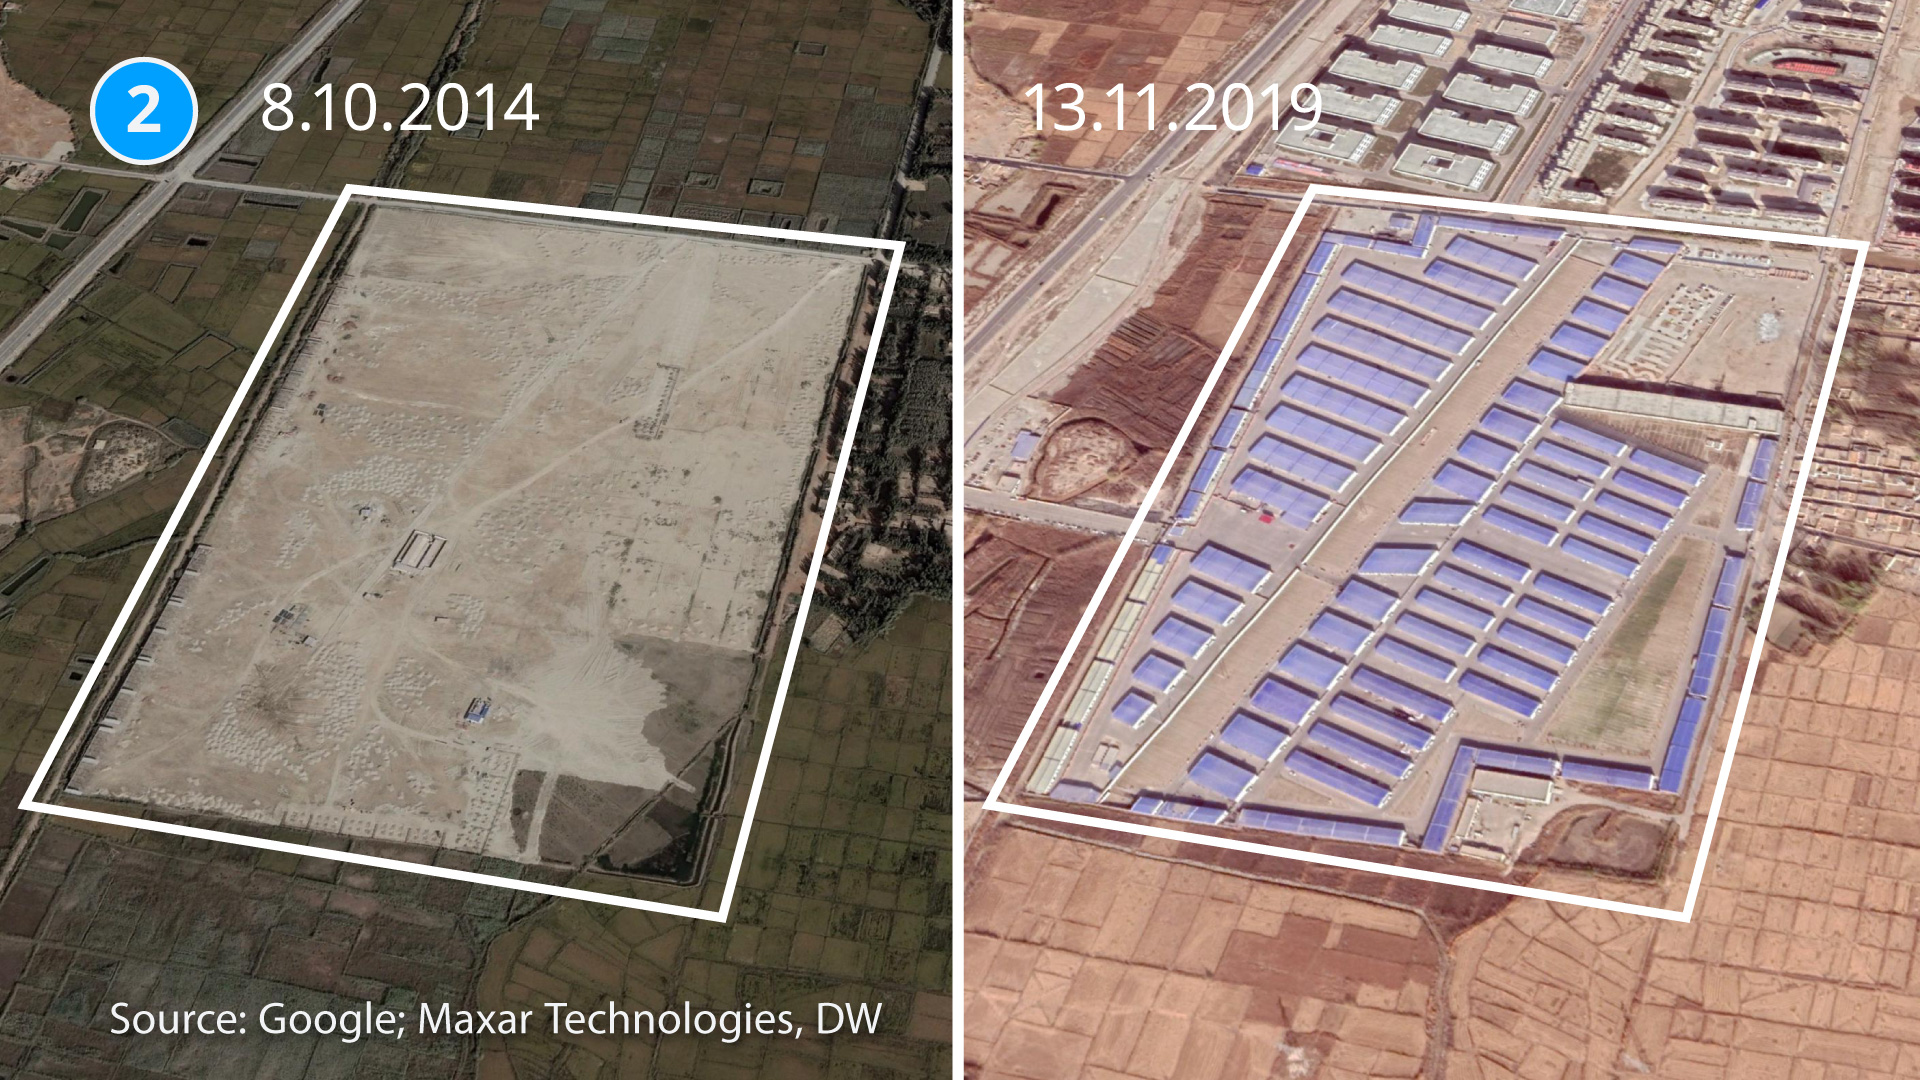 A satellite image of one of five newly built 're-education' camps in Hotan County, Xinjiang, China